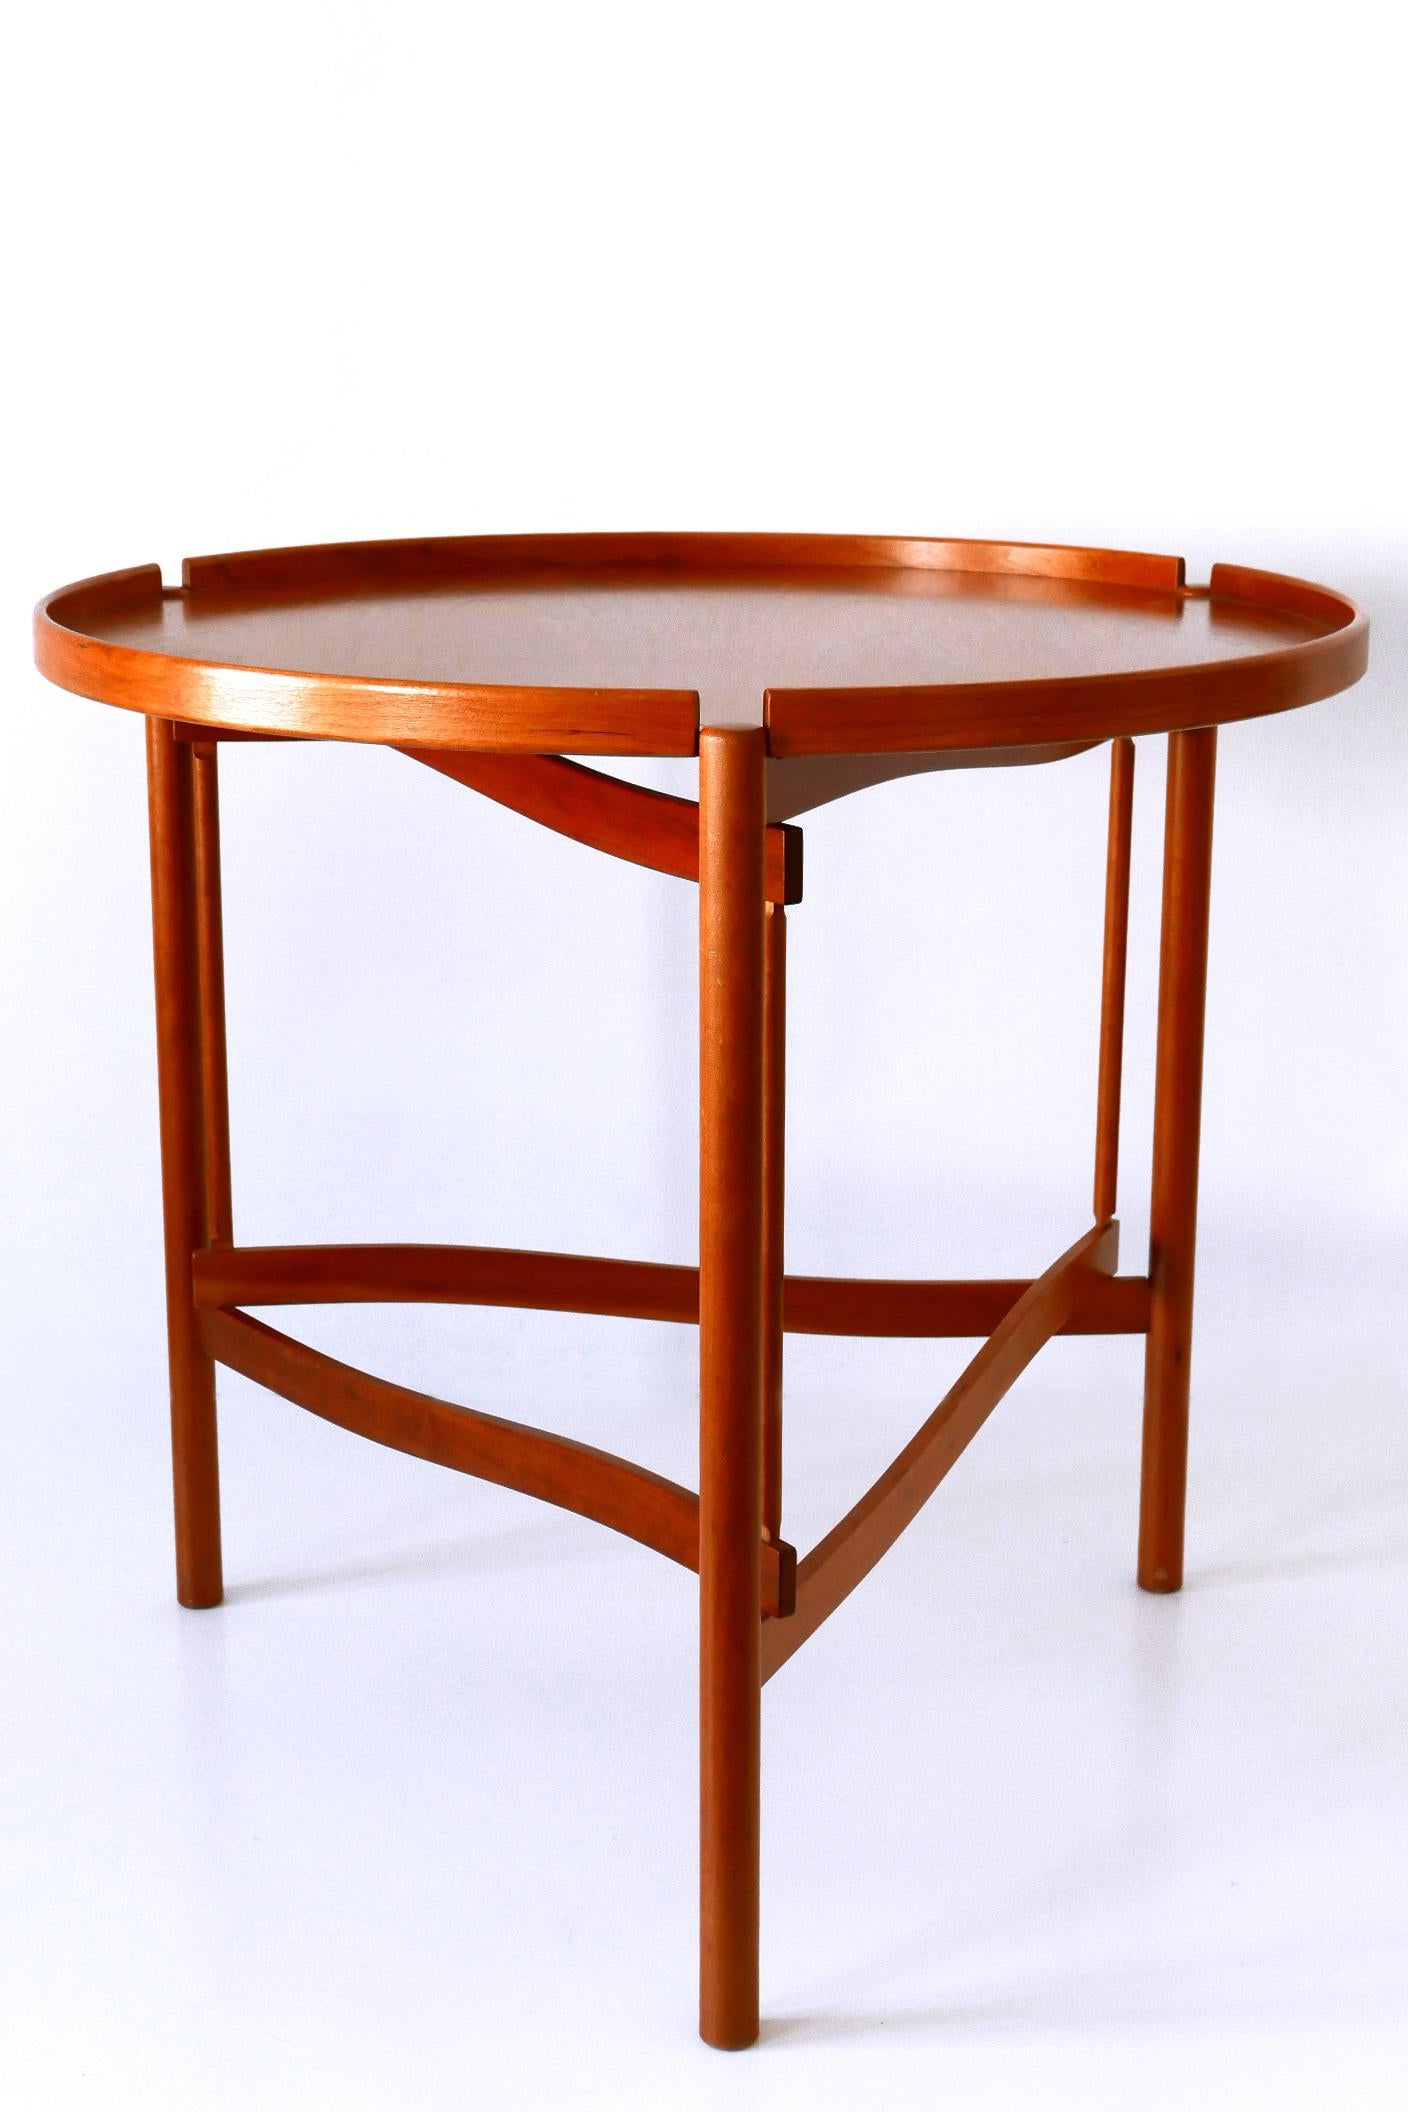 Exceptional Side Table Tema by Hans Johansson for Karl Andersson & Söner Sweden In Good Condition For Sale In Munich, DE